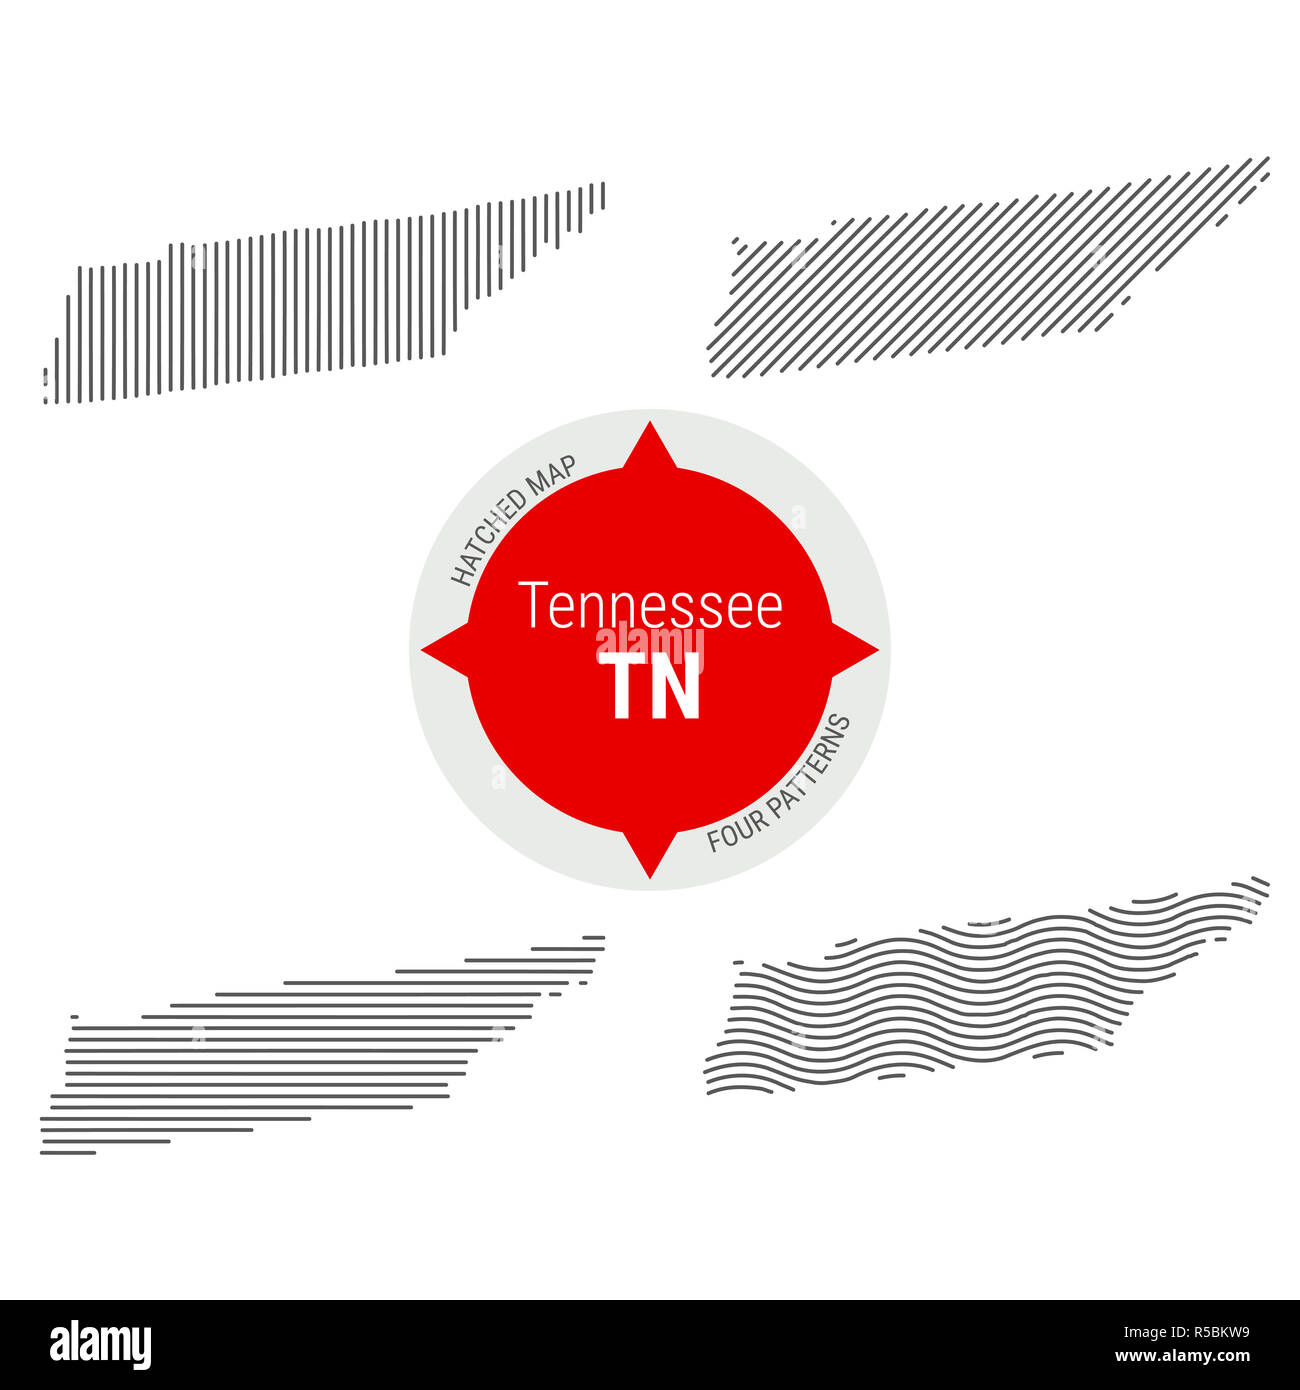 Hatched Pattern Map of Tennessee. Stylized Simple Silhouette of Tennessee. Four Different Patterns. Illustration Isolated on White Background. Stock Photo